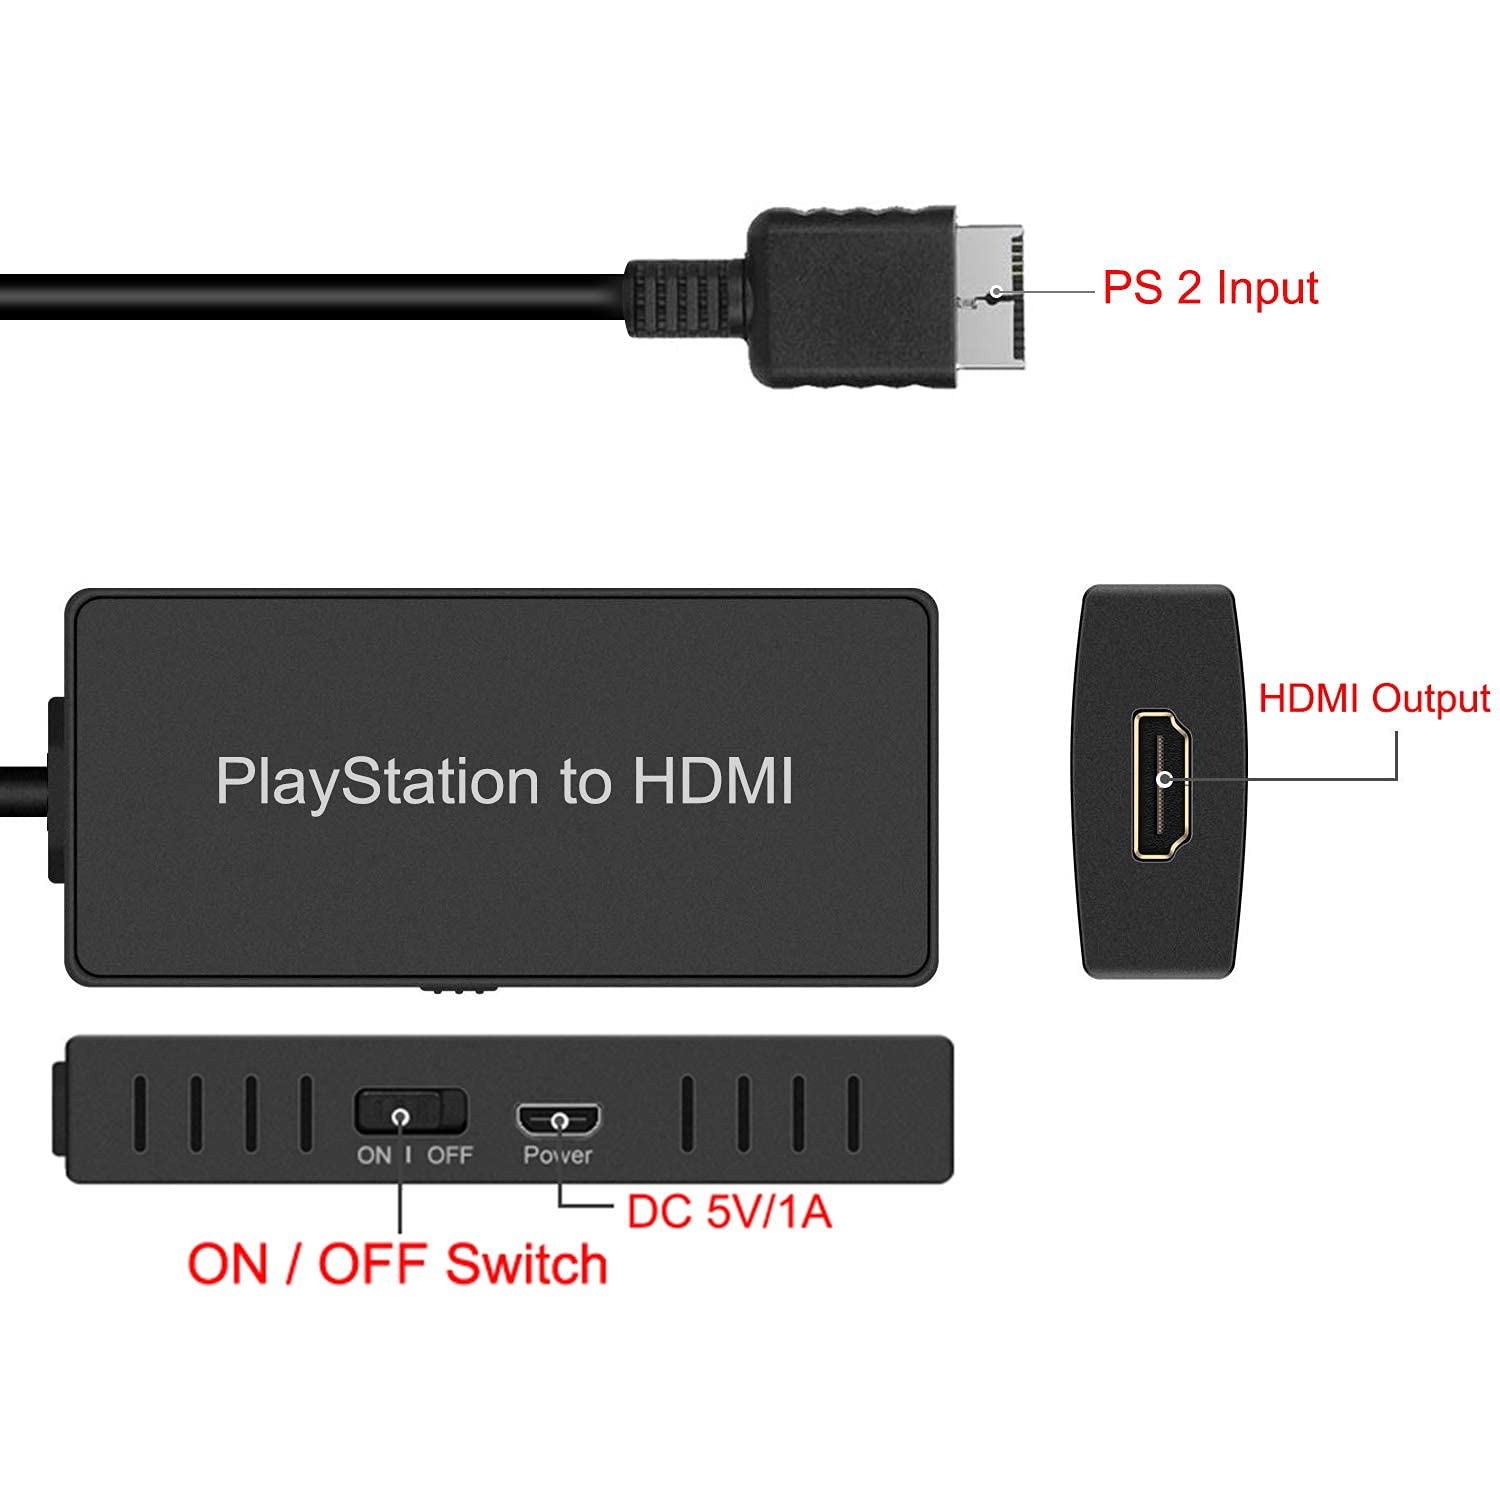 Azduou Playstation 2 (PS2) to HDMI Converter, HDMI Cable for Playstation 2, Playstation 3 Console (PS2, PS3), Connecting PS2/PS3 to HDTV with True Ypbpr HD Signal Output (100% Improve Video Quality)